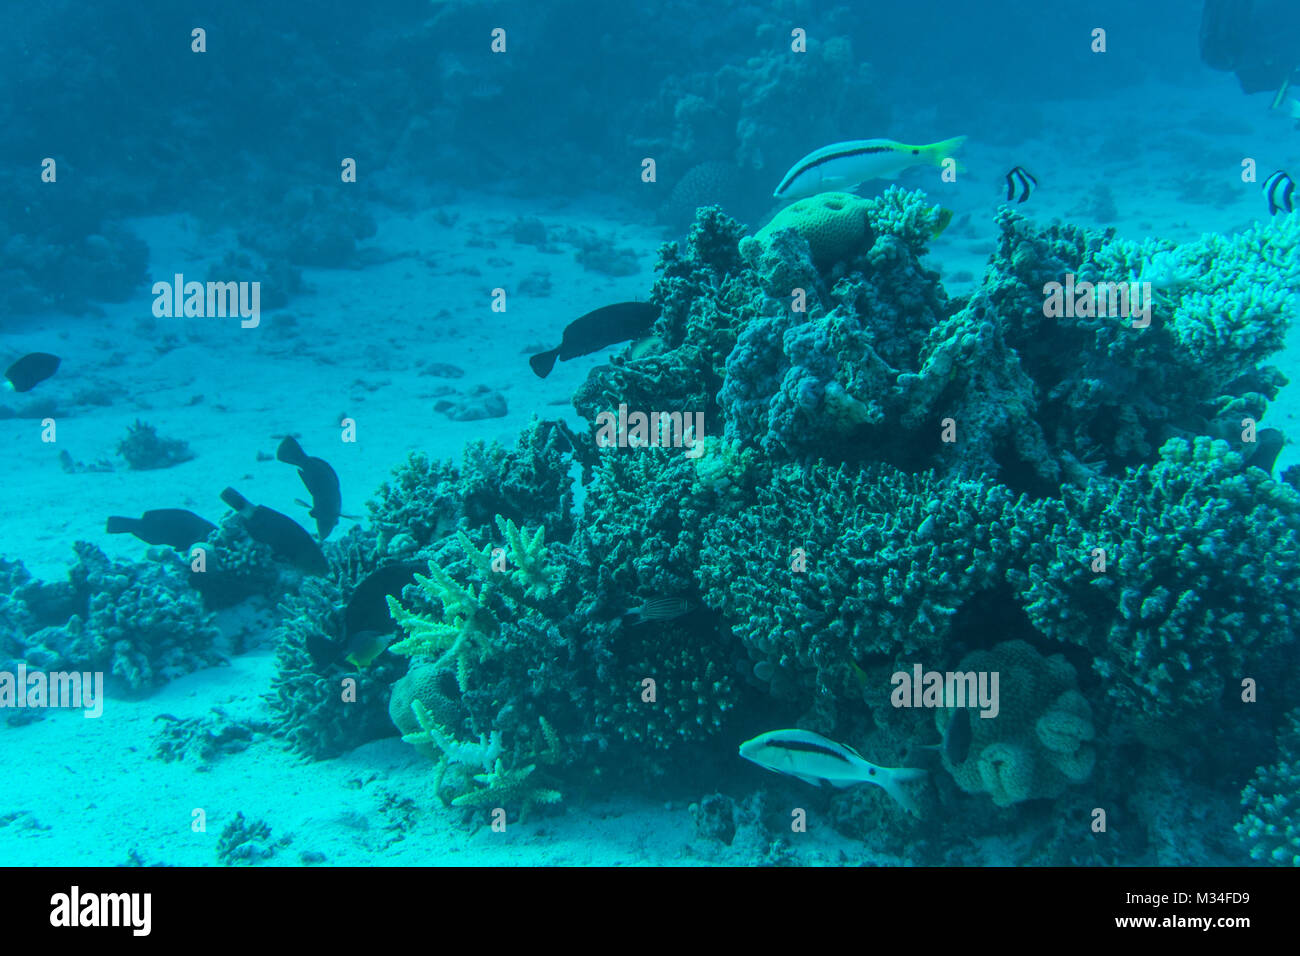 coral reef with fire coral and exotic fishes at the bottom of colorful tropical sea Stock Photo